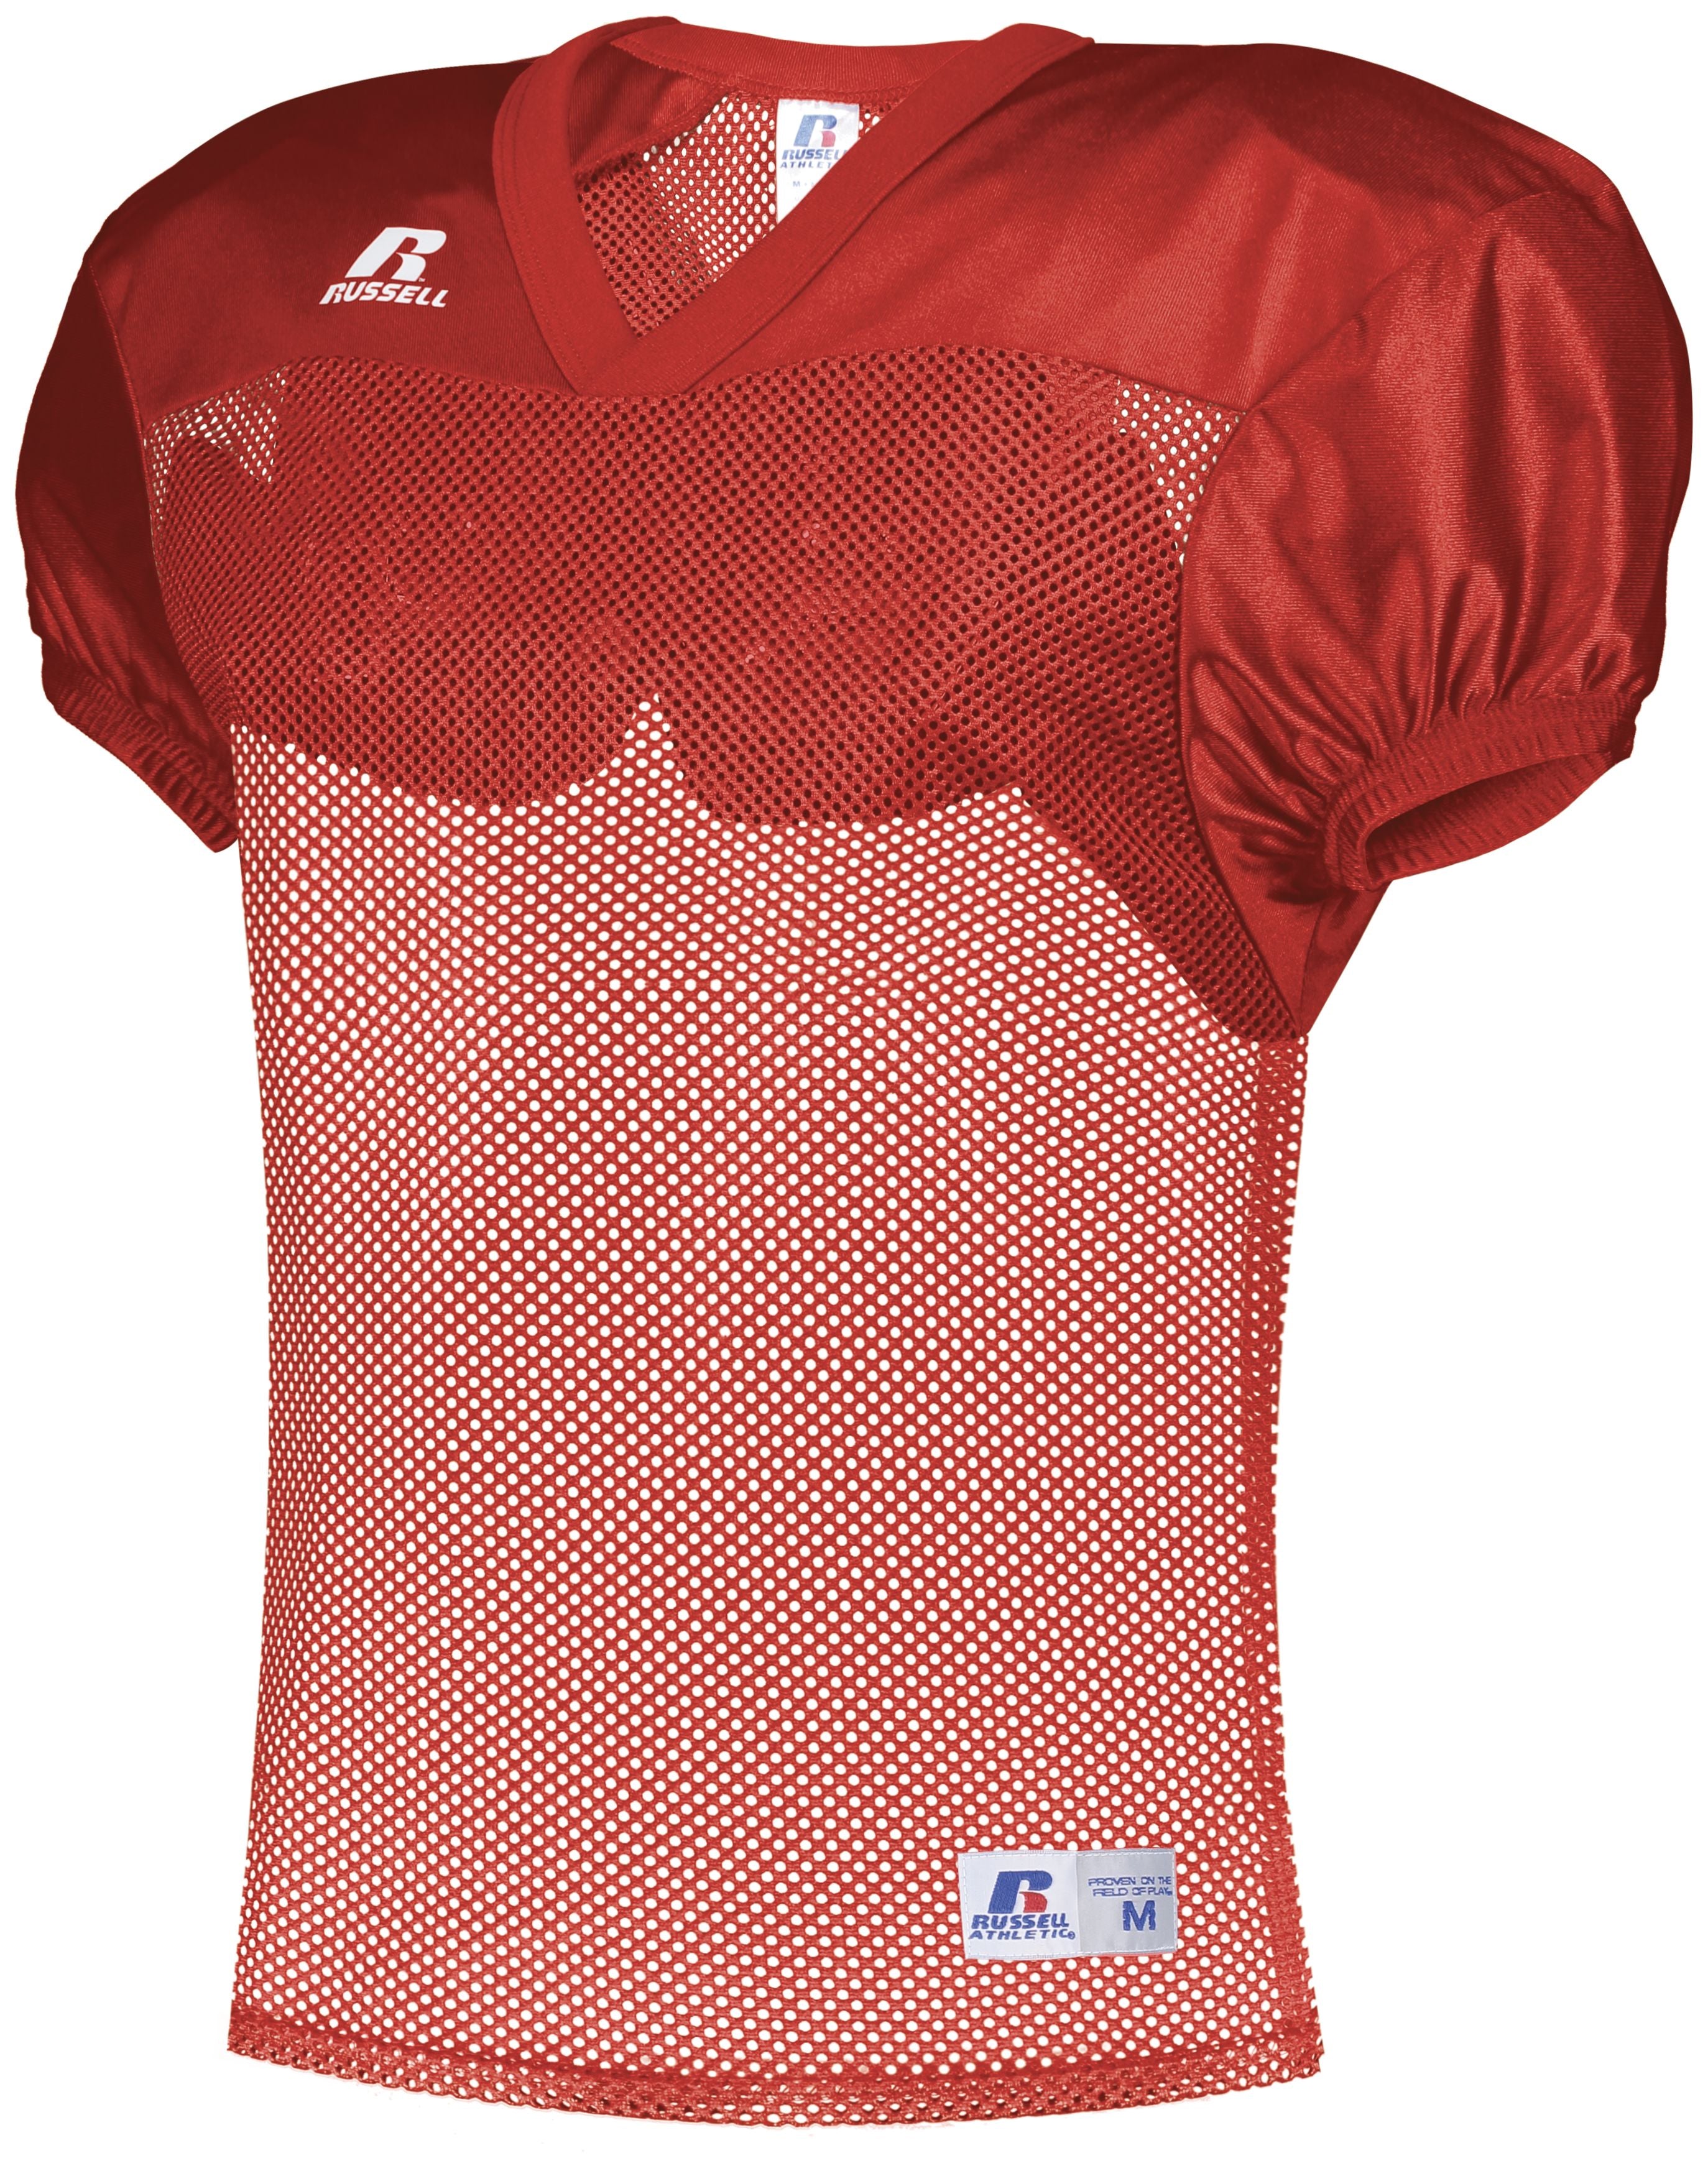 Russell Athletic Youth Stock Practice Jersey in True Red  -Part of the Youth, Youth-Jersey, Football, Russell-Athletic-Products, Shirts, All-Sports, All-Sports-1 product lines at KanaleyCreations.com